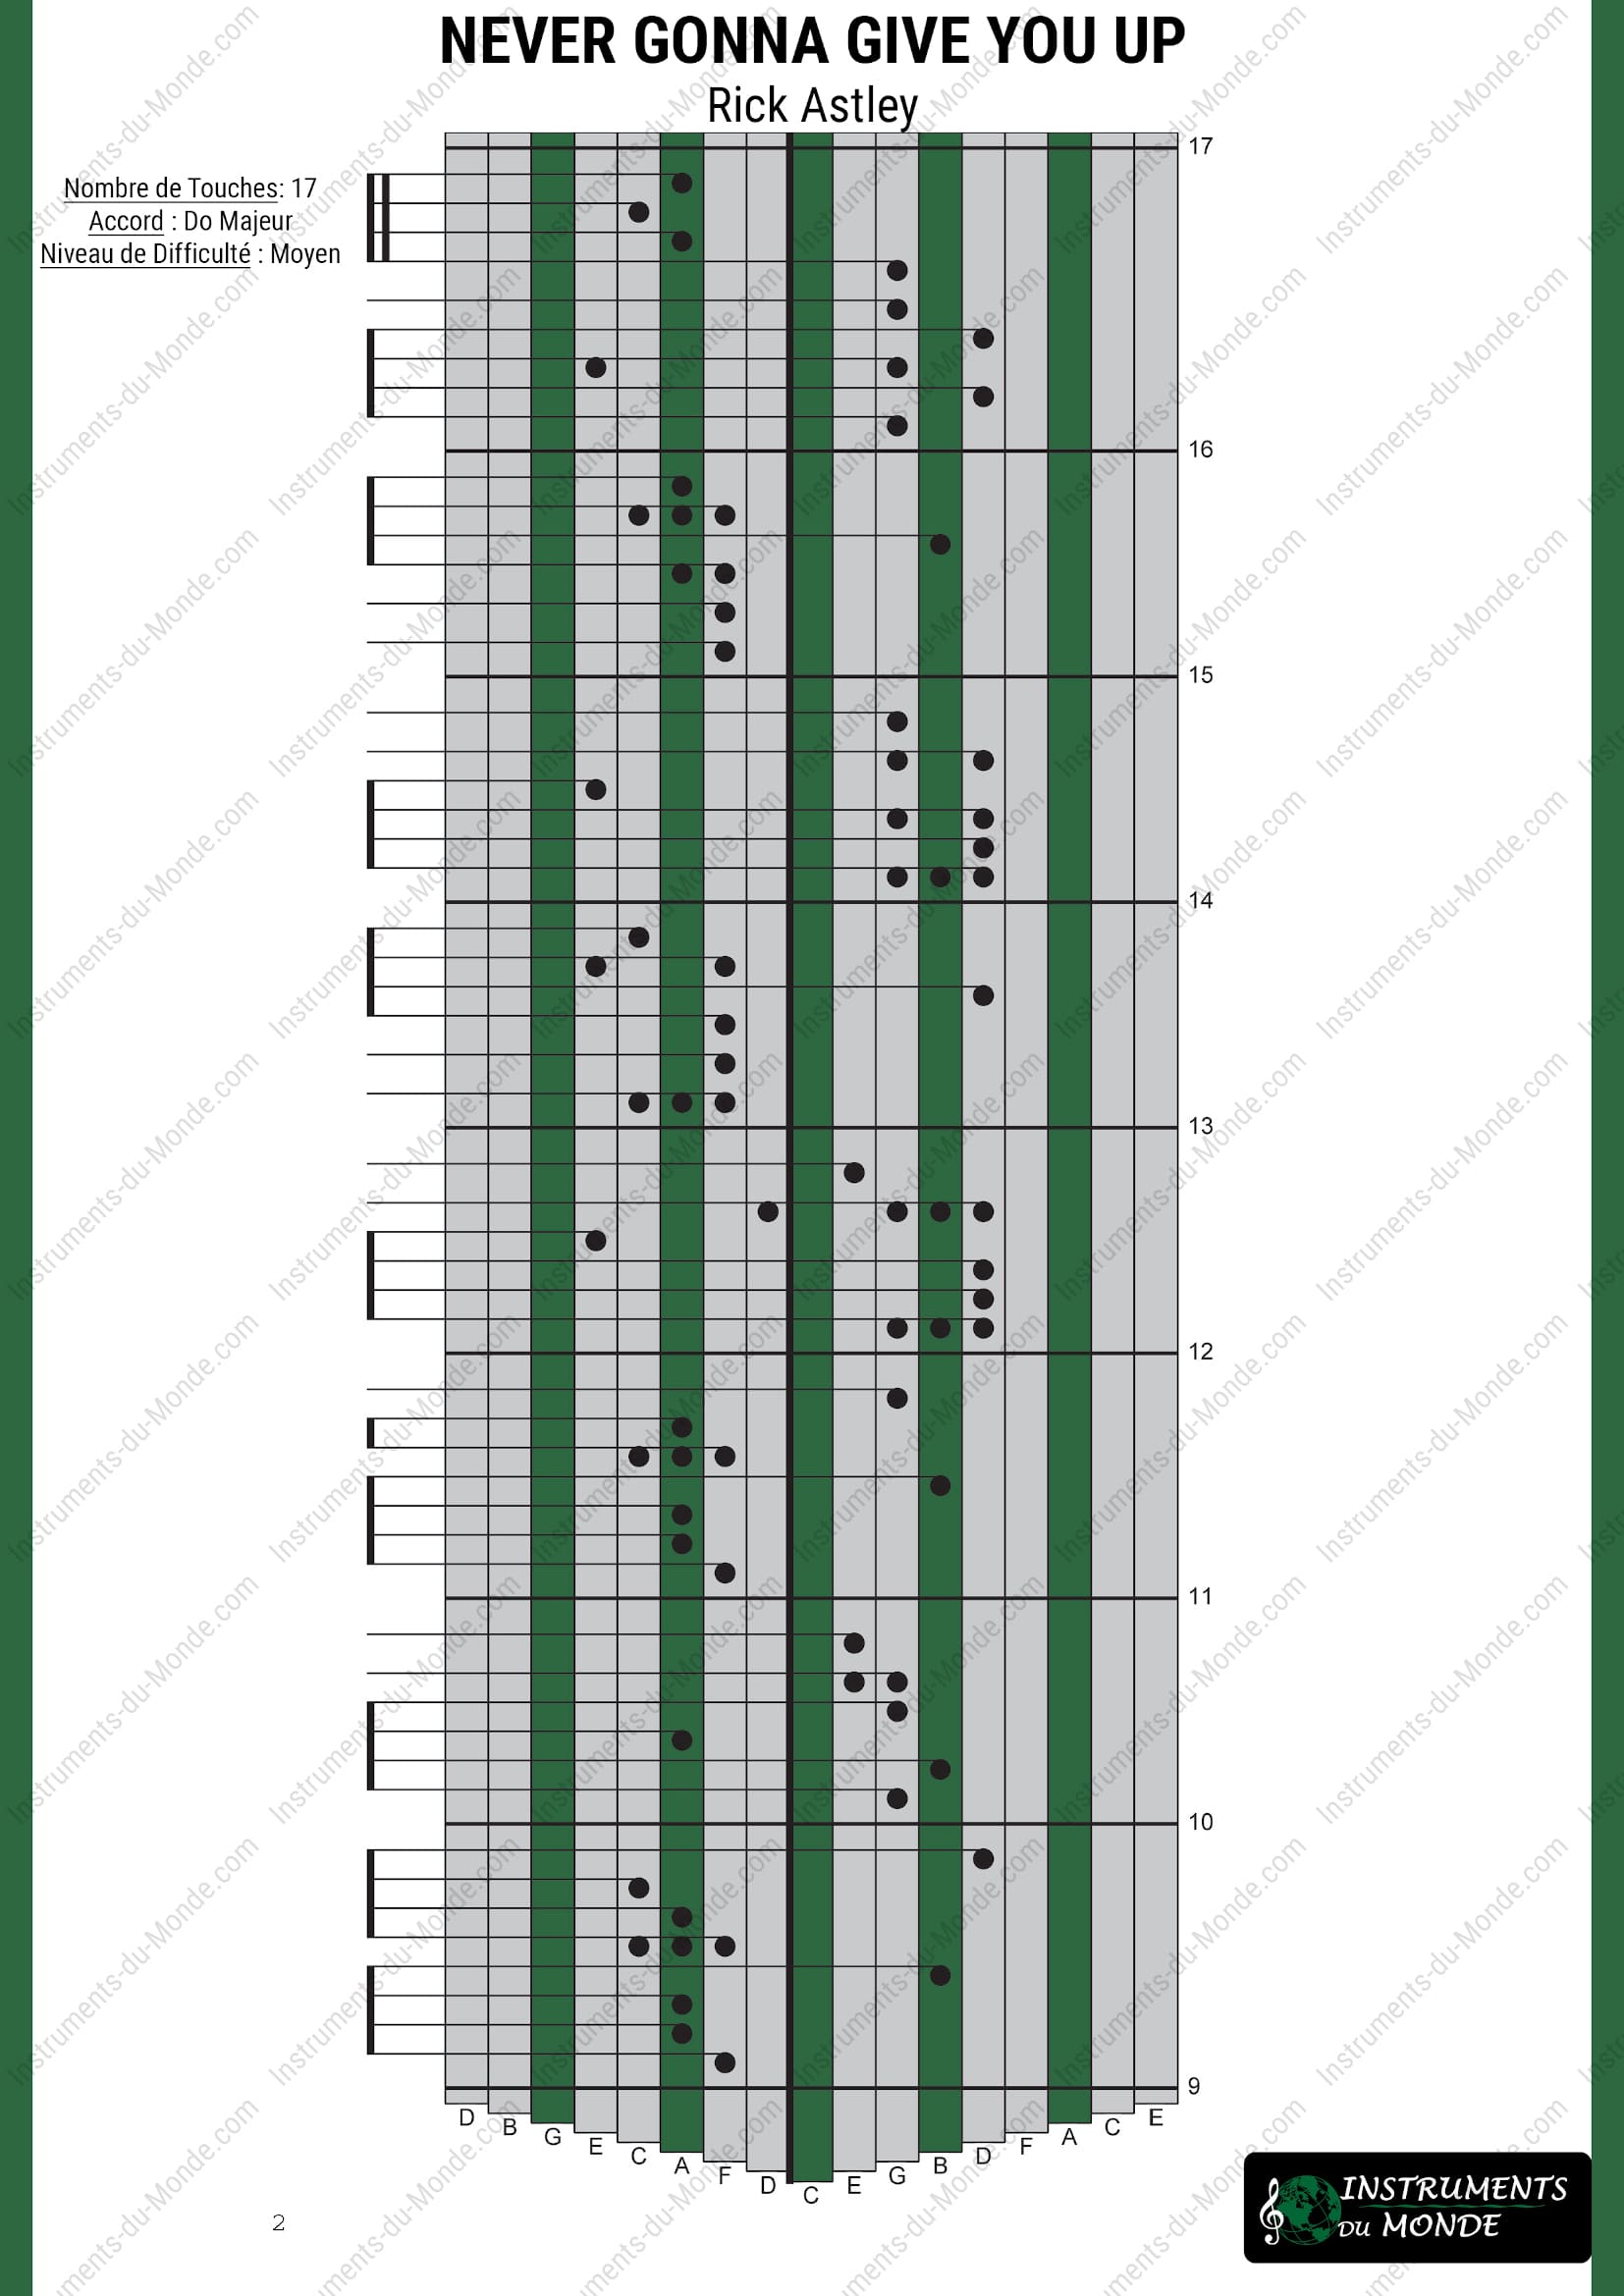 Tablature Kalimba Never Gonna Give You Up Rick Astley page 2